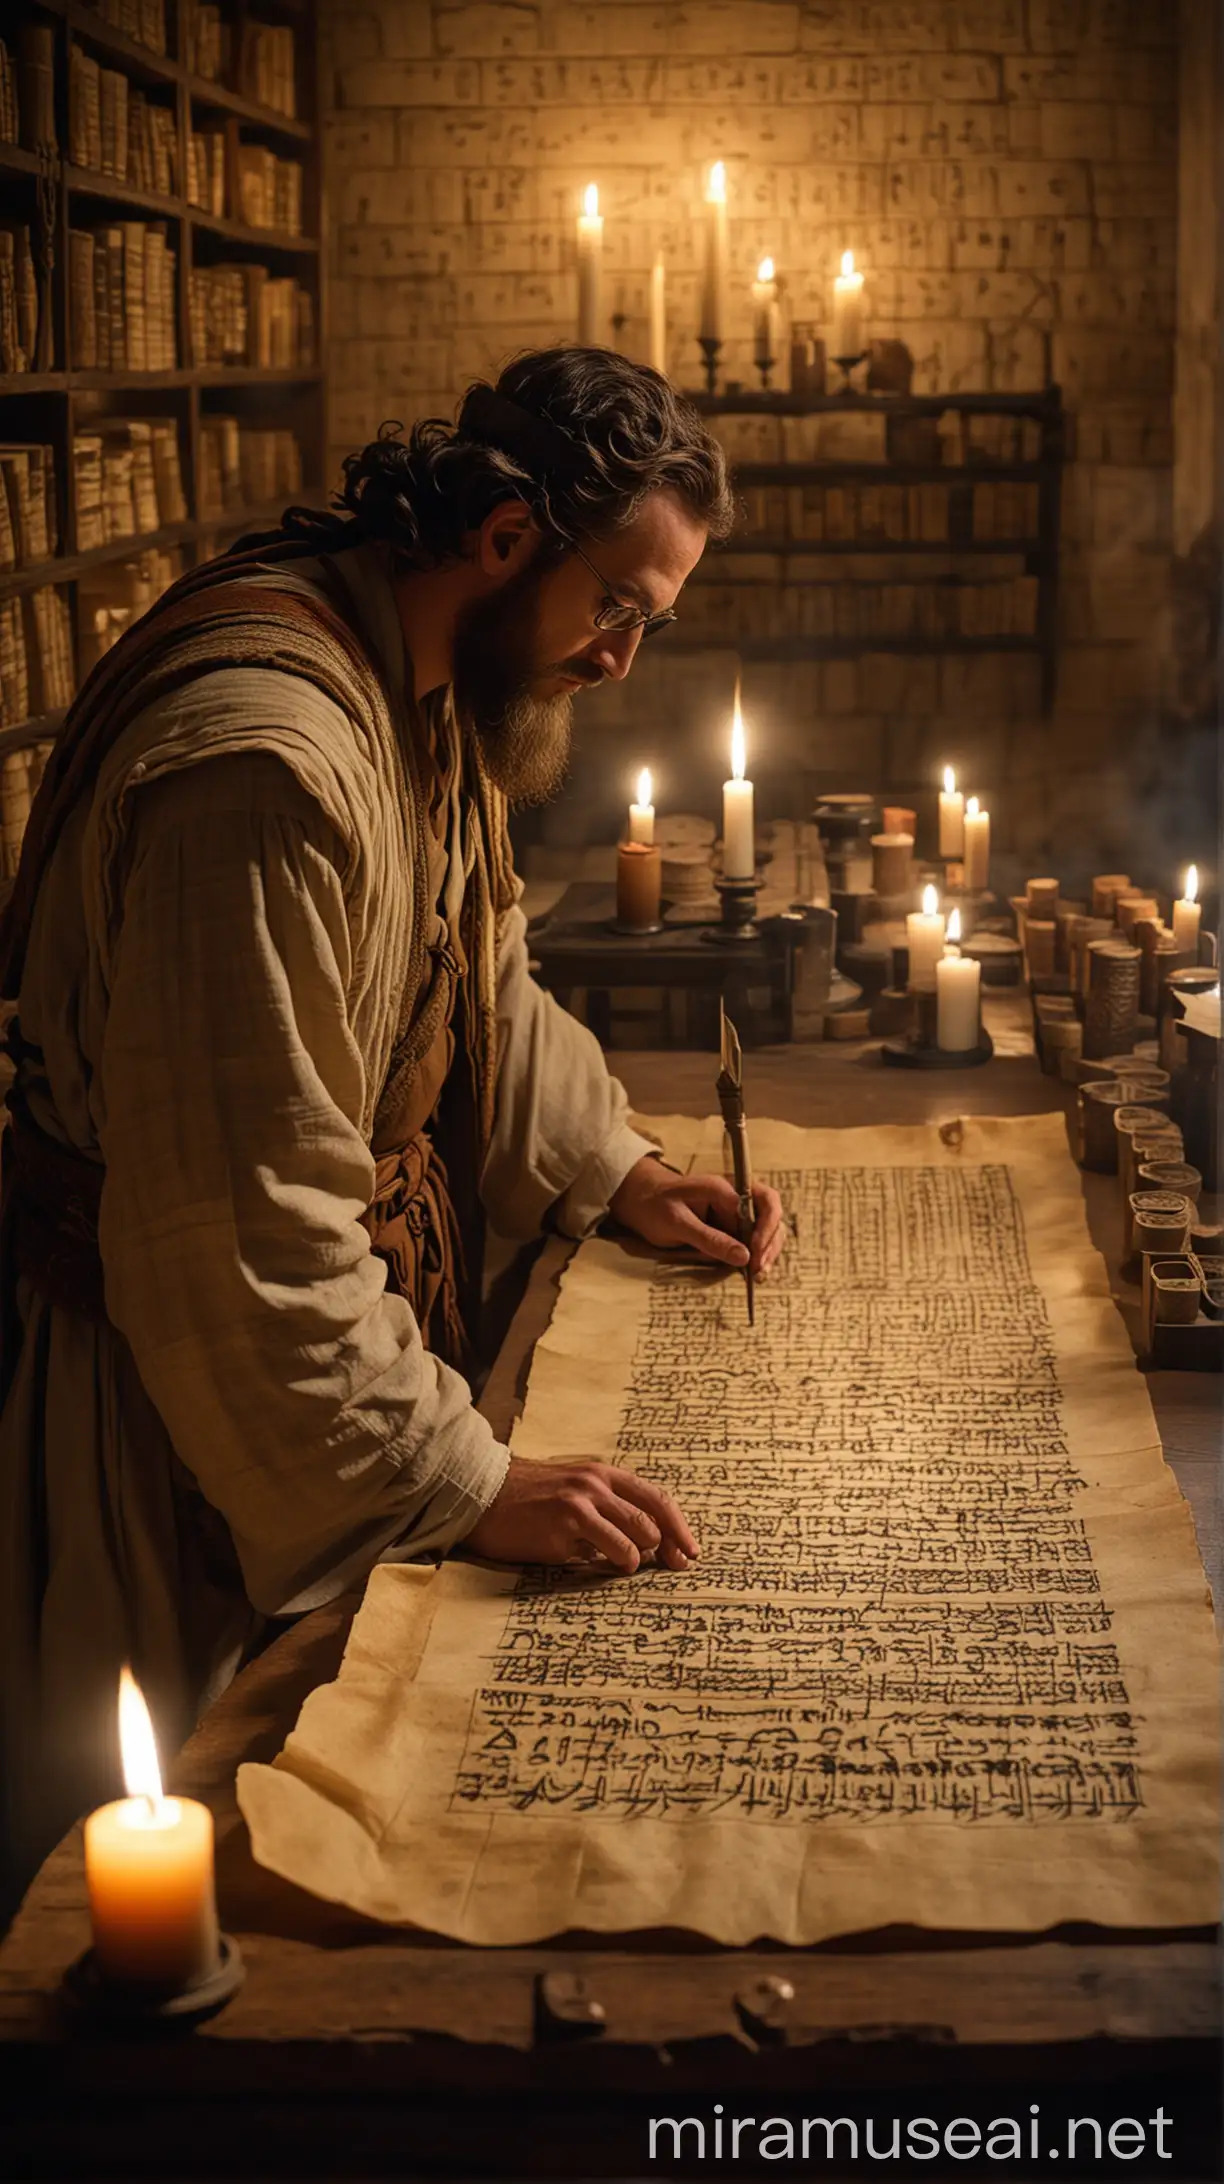 Ancient Historian Studying 17th Century BC Hebrew Scroll by Candlelight